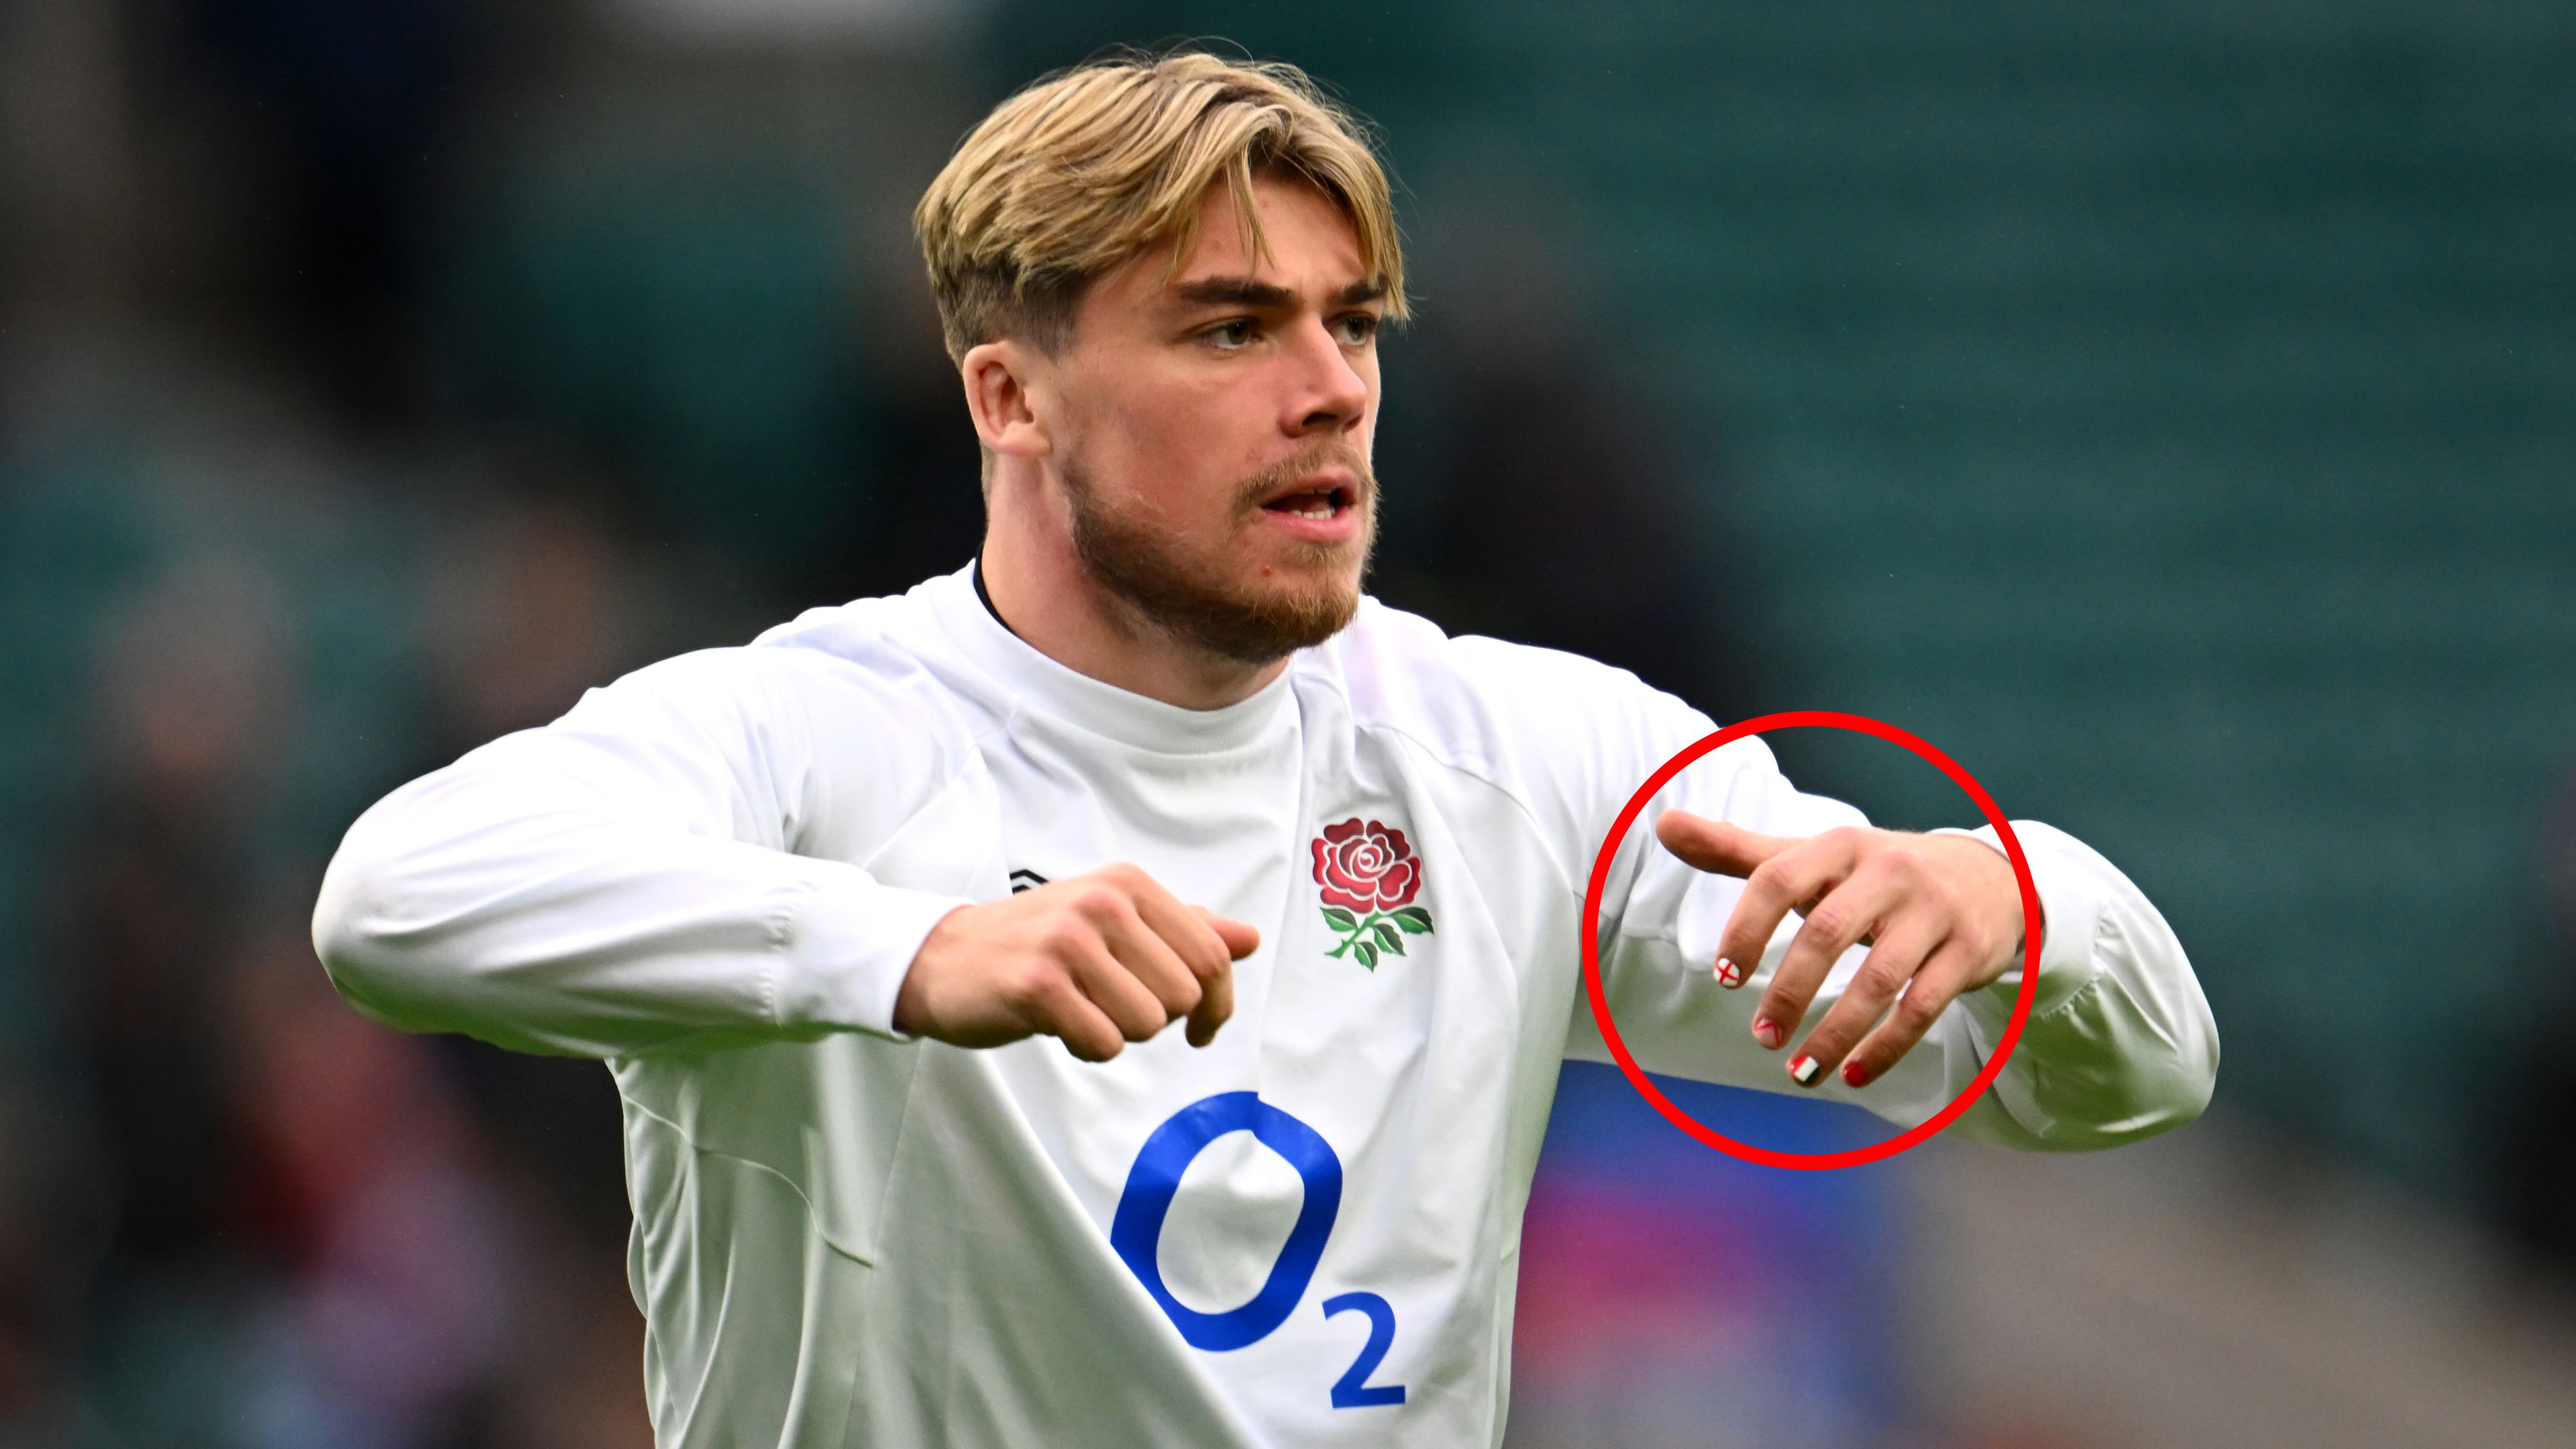 England&#x27;s Ollie Hassell-Collins warms up with his painted nails prior to the Six Nations Rugby match between England and Italy at Twickenham.